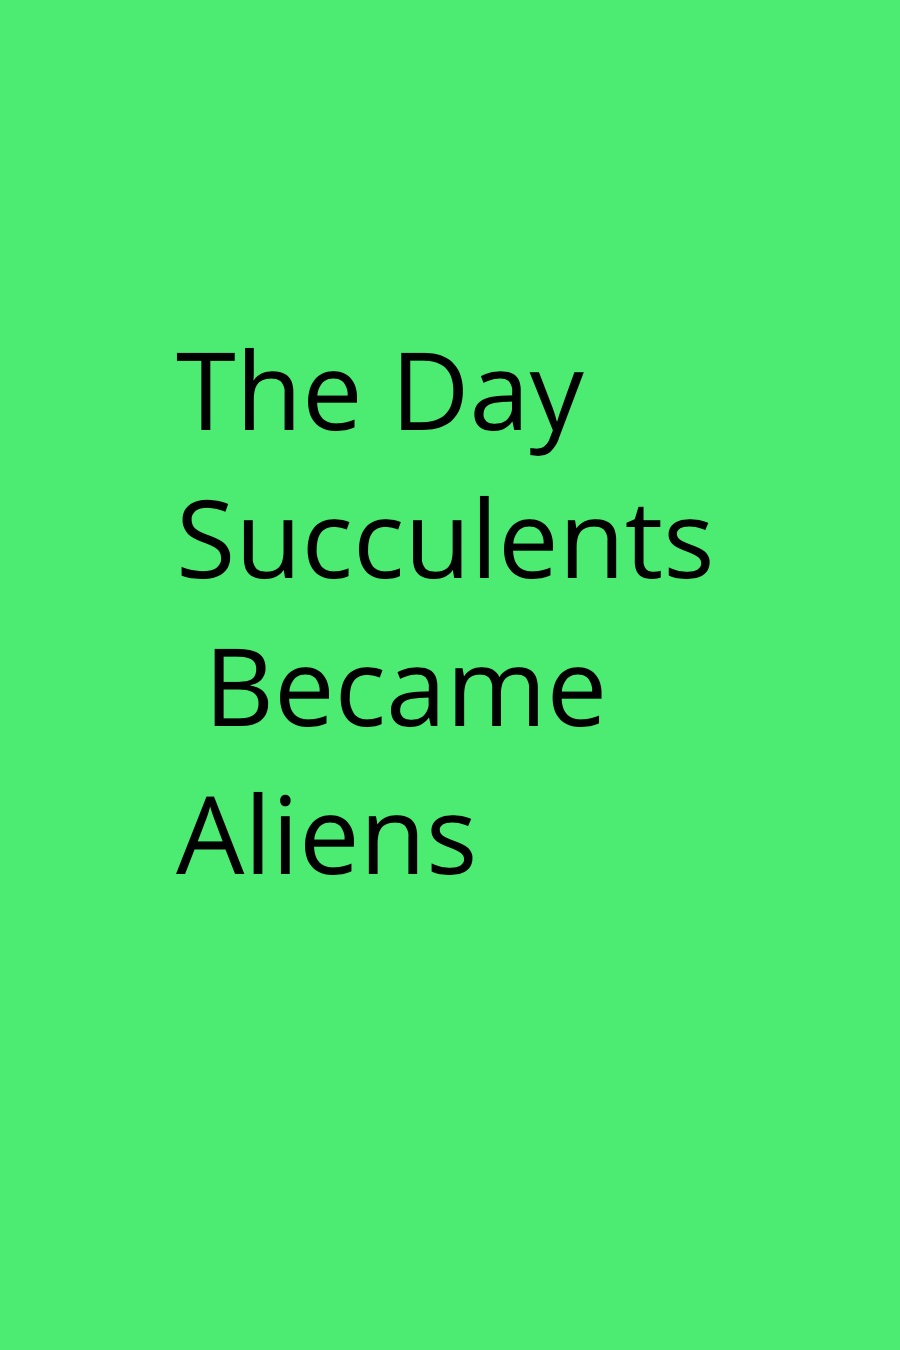 The Day the Succulents became Aliens By Elizabeth Cady K